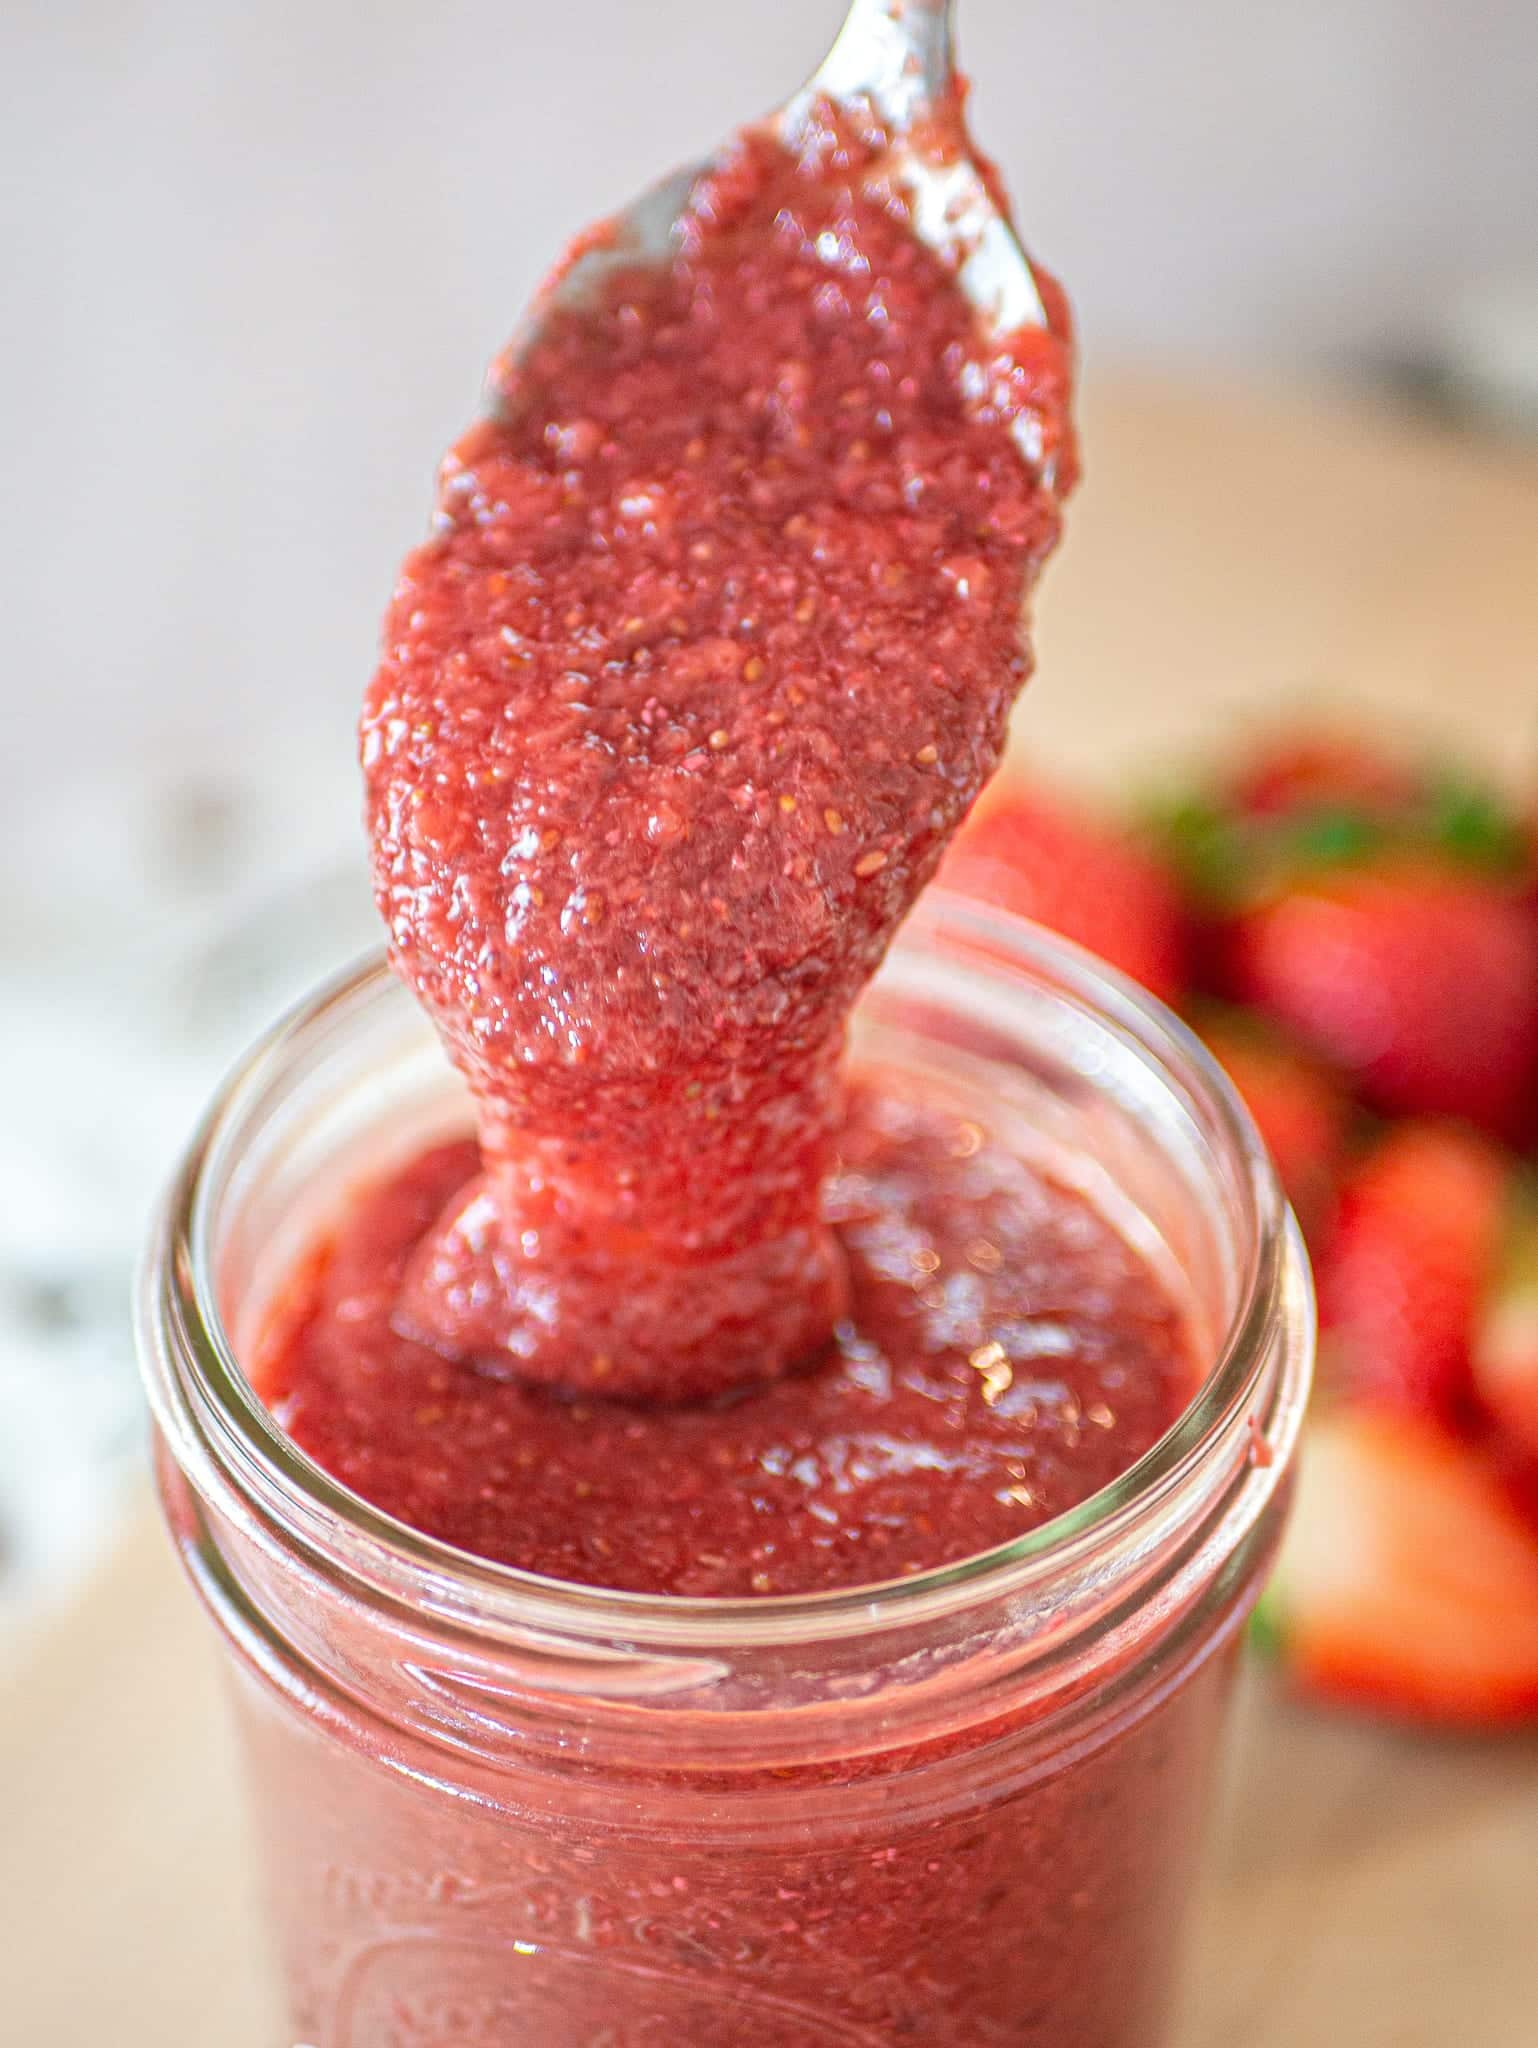 STRAWBERRY JAM DRIPPING FROM GOLDEN SPOON